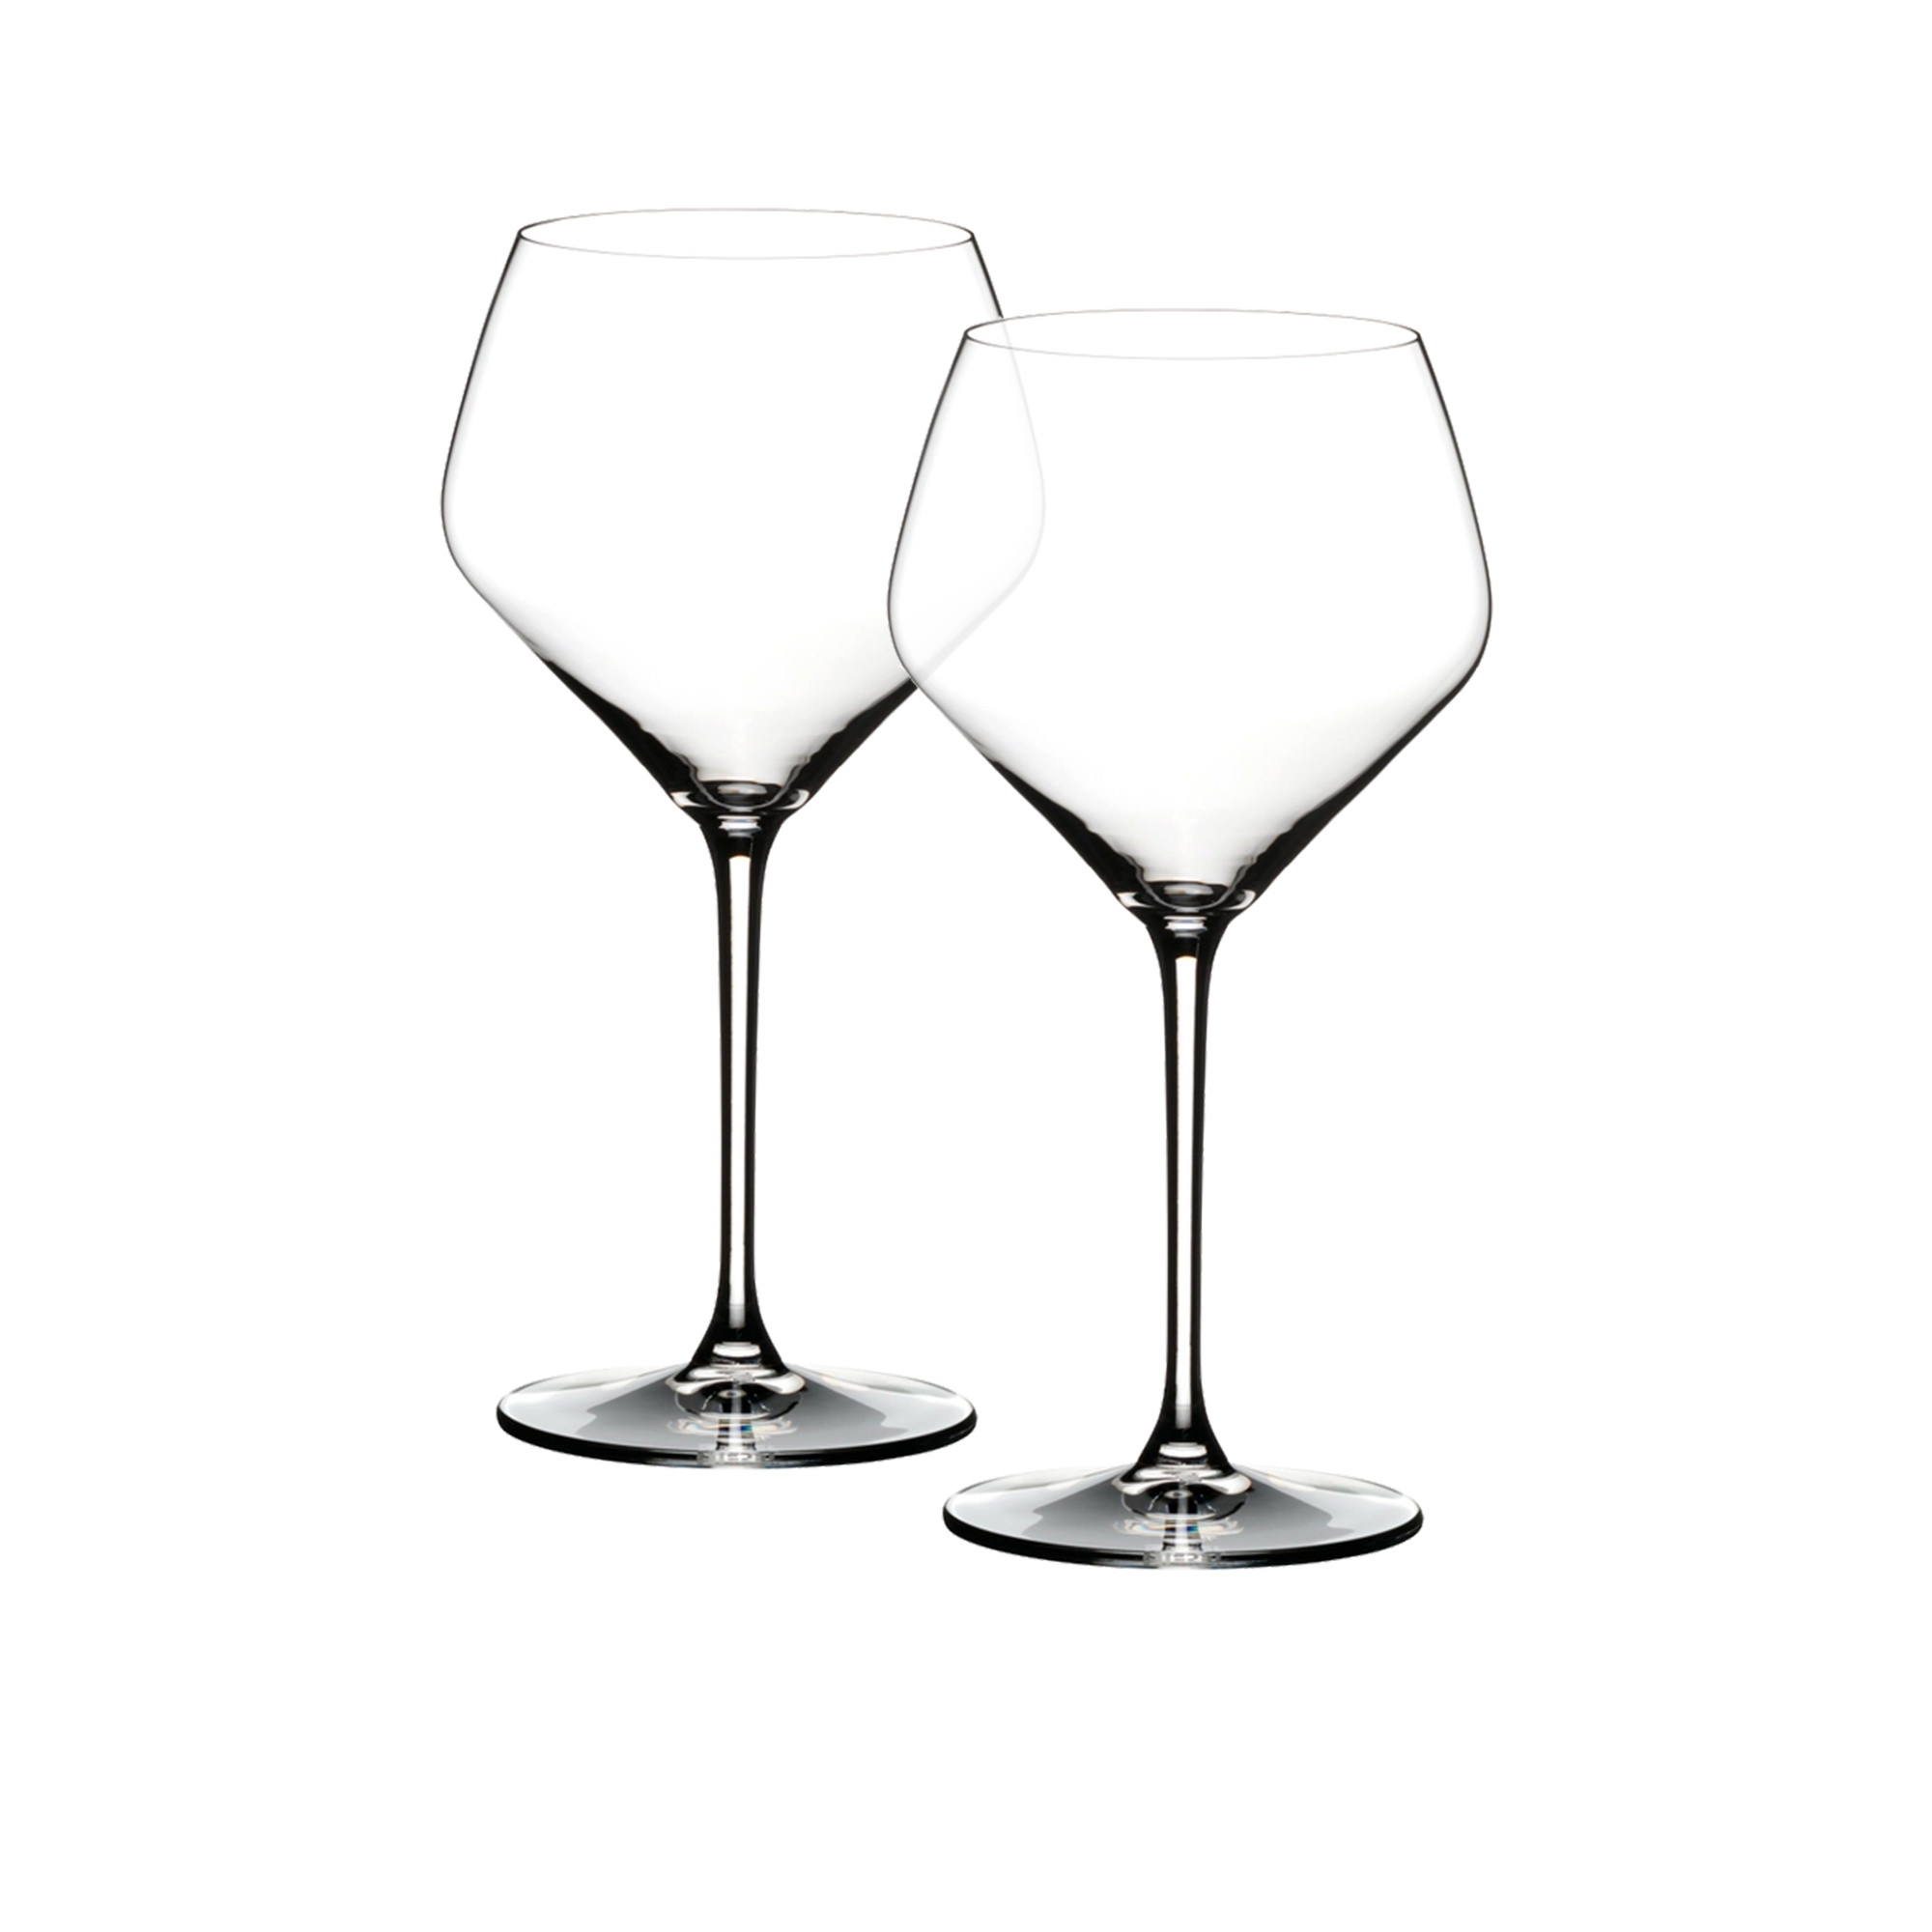 Riedel Extreme Oaked Chardonnay Glass 670ml Set of 2 Image 2